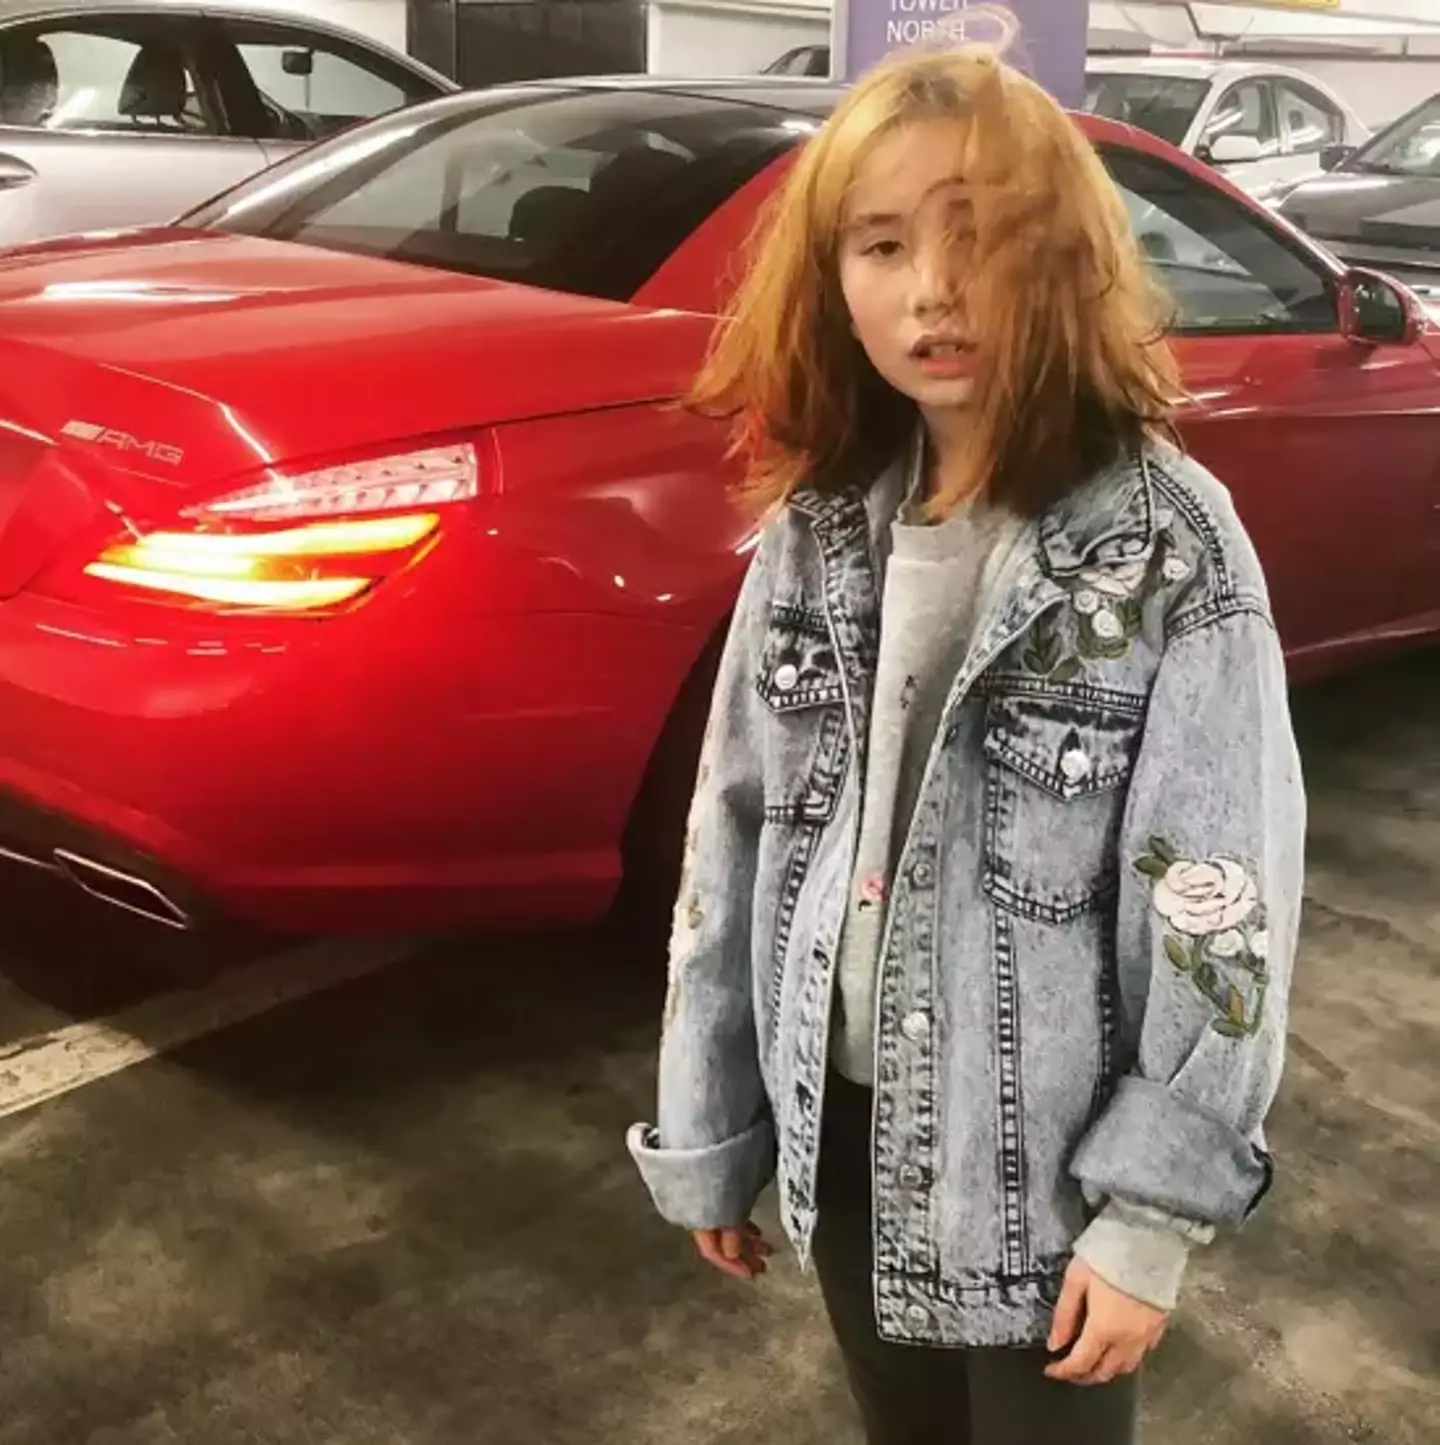 Internet sensation and rapper Lil Tay has died.